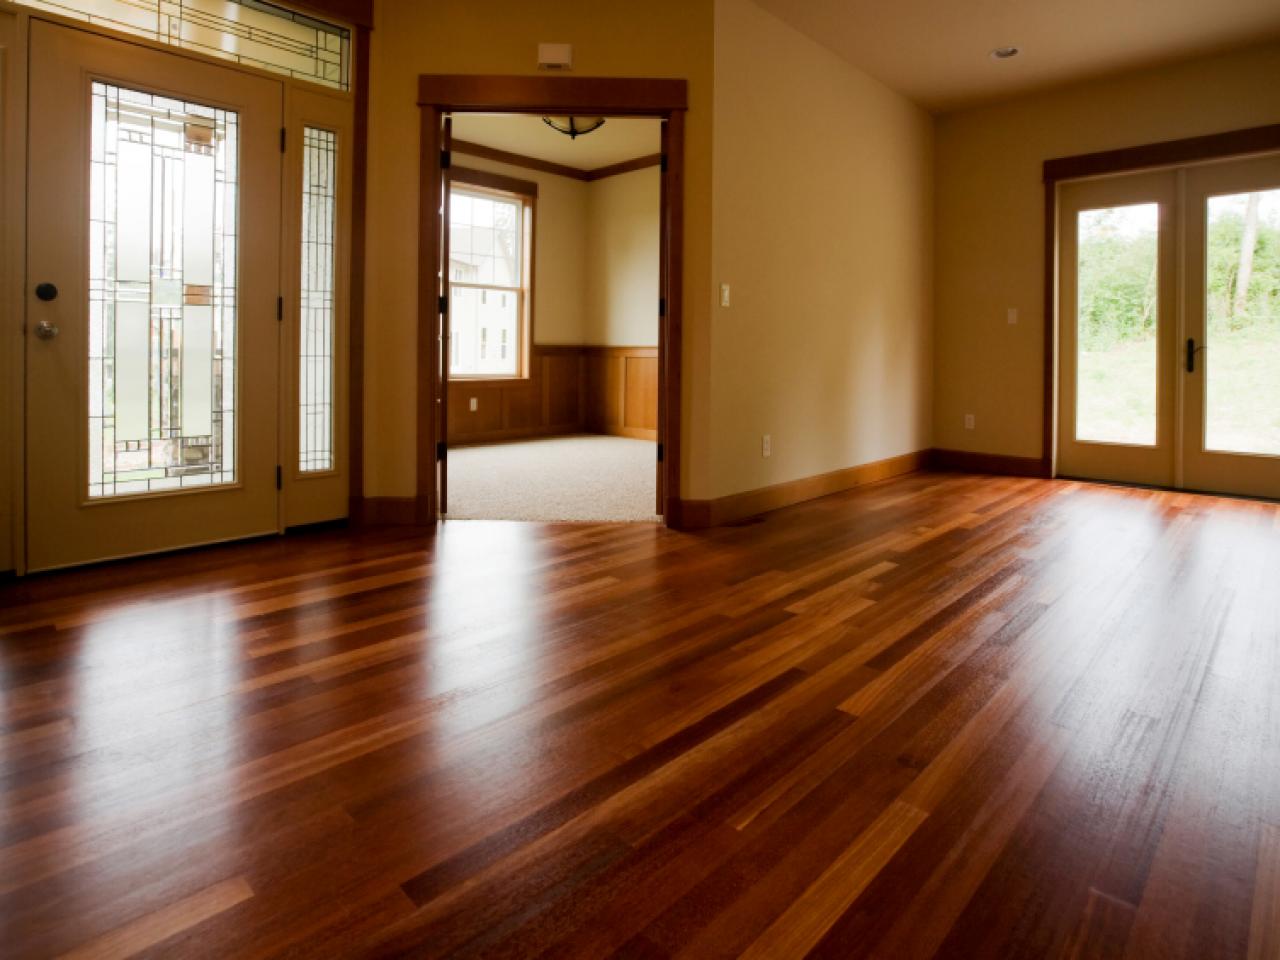 Cleaning Tile Wood And Vinyl Floors, How To Maintain Hardwood Floors In Kitchen